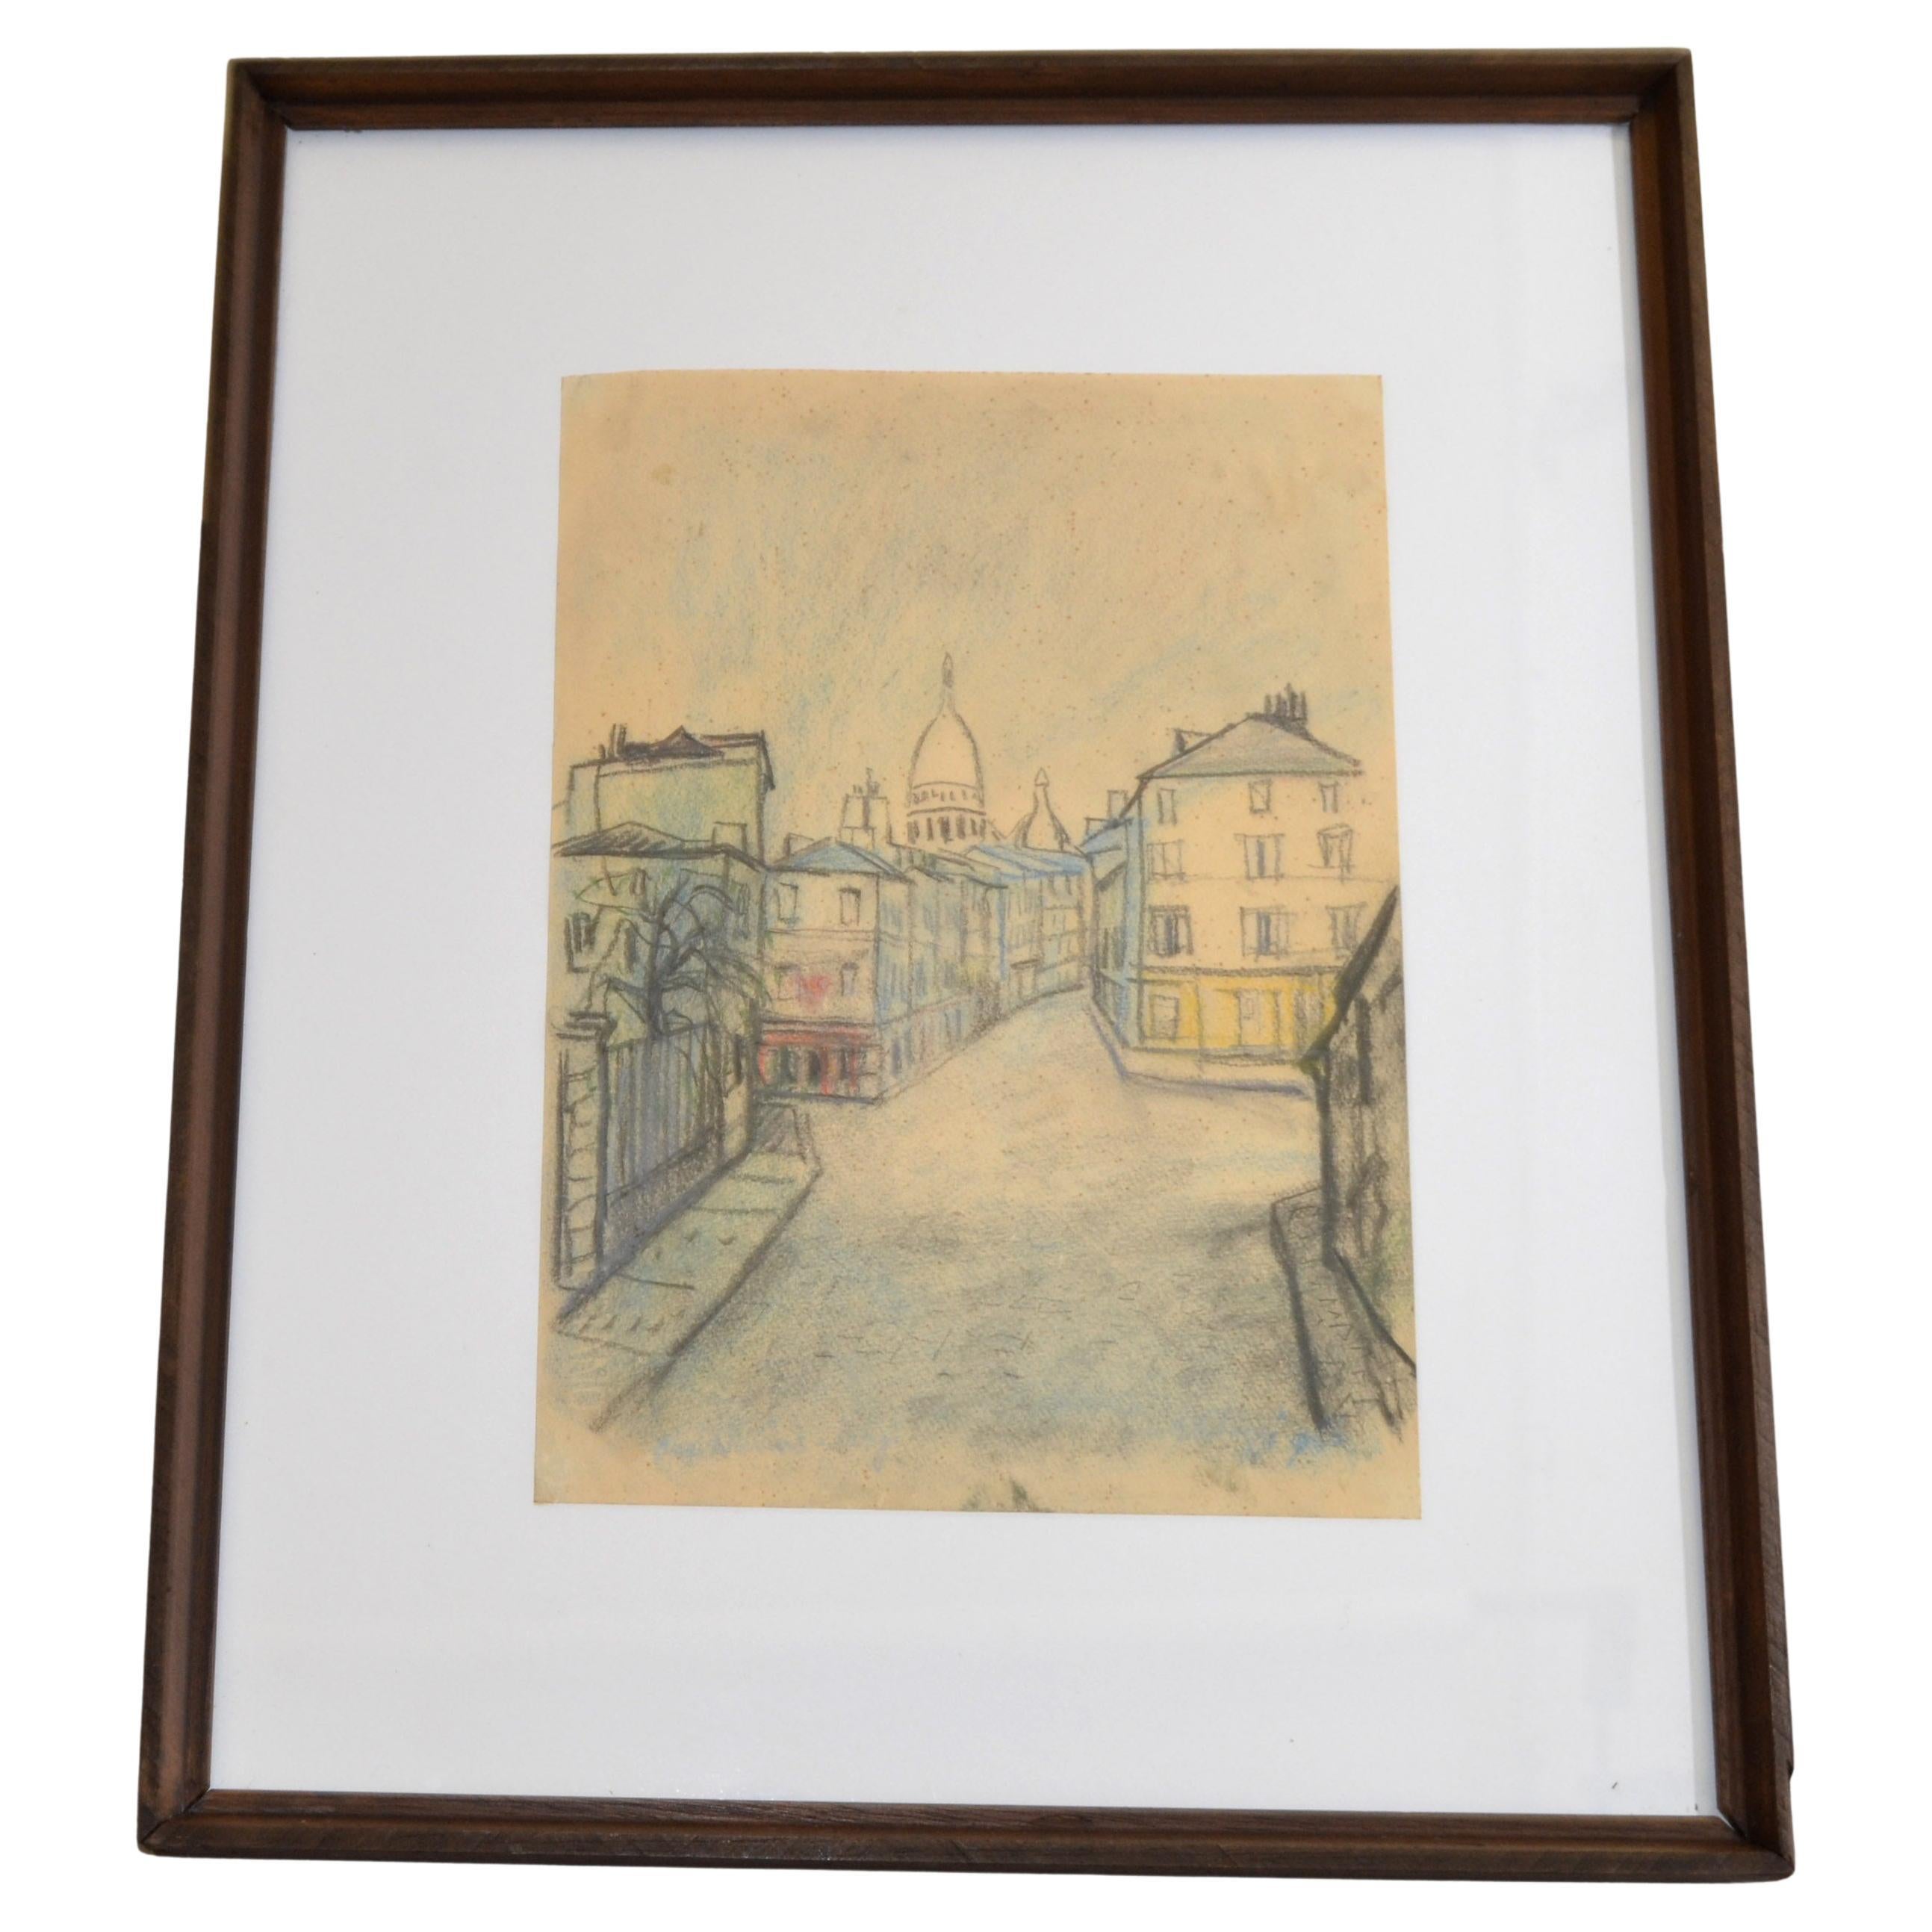 Framed French Cityscape Pencil painting on board made in circa 1970s.
Depicting a French City Scene.
Framed in brown Wood.
In all original pristine condition with some wear as documented.
Art Size measures: 9 x 12.5 inches.
 